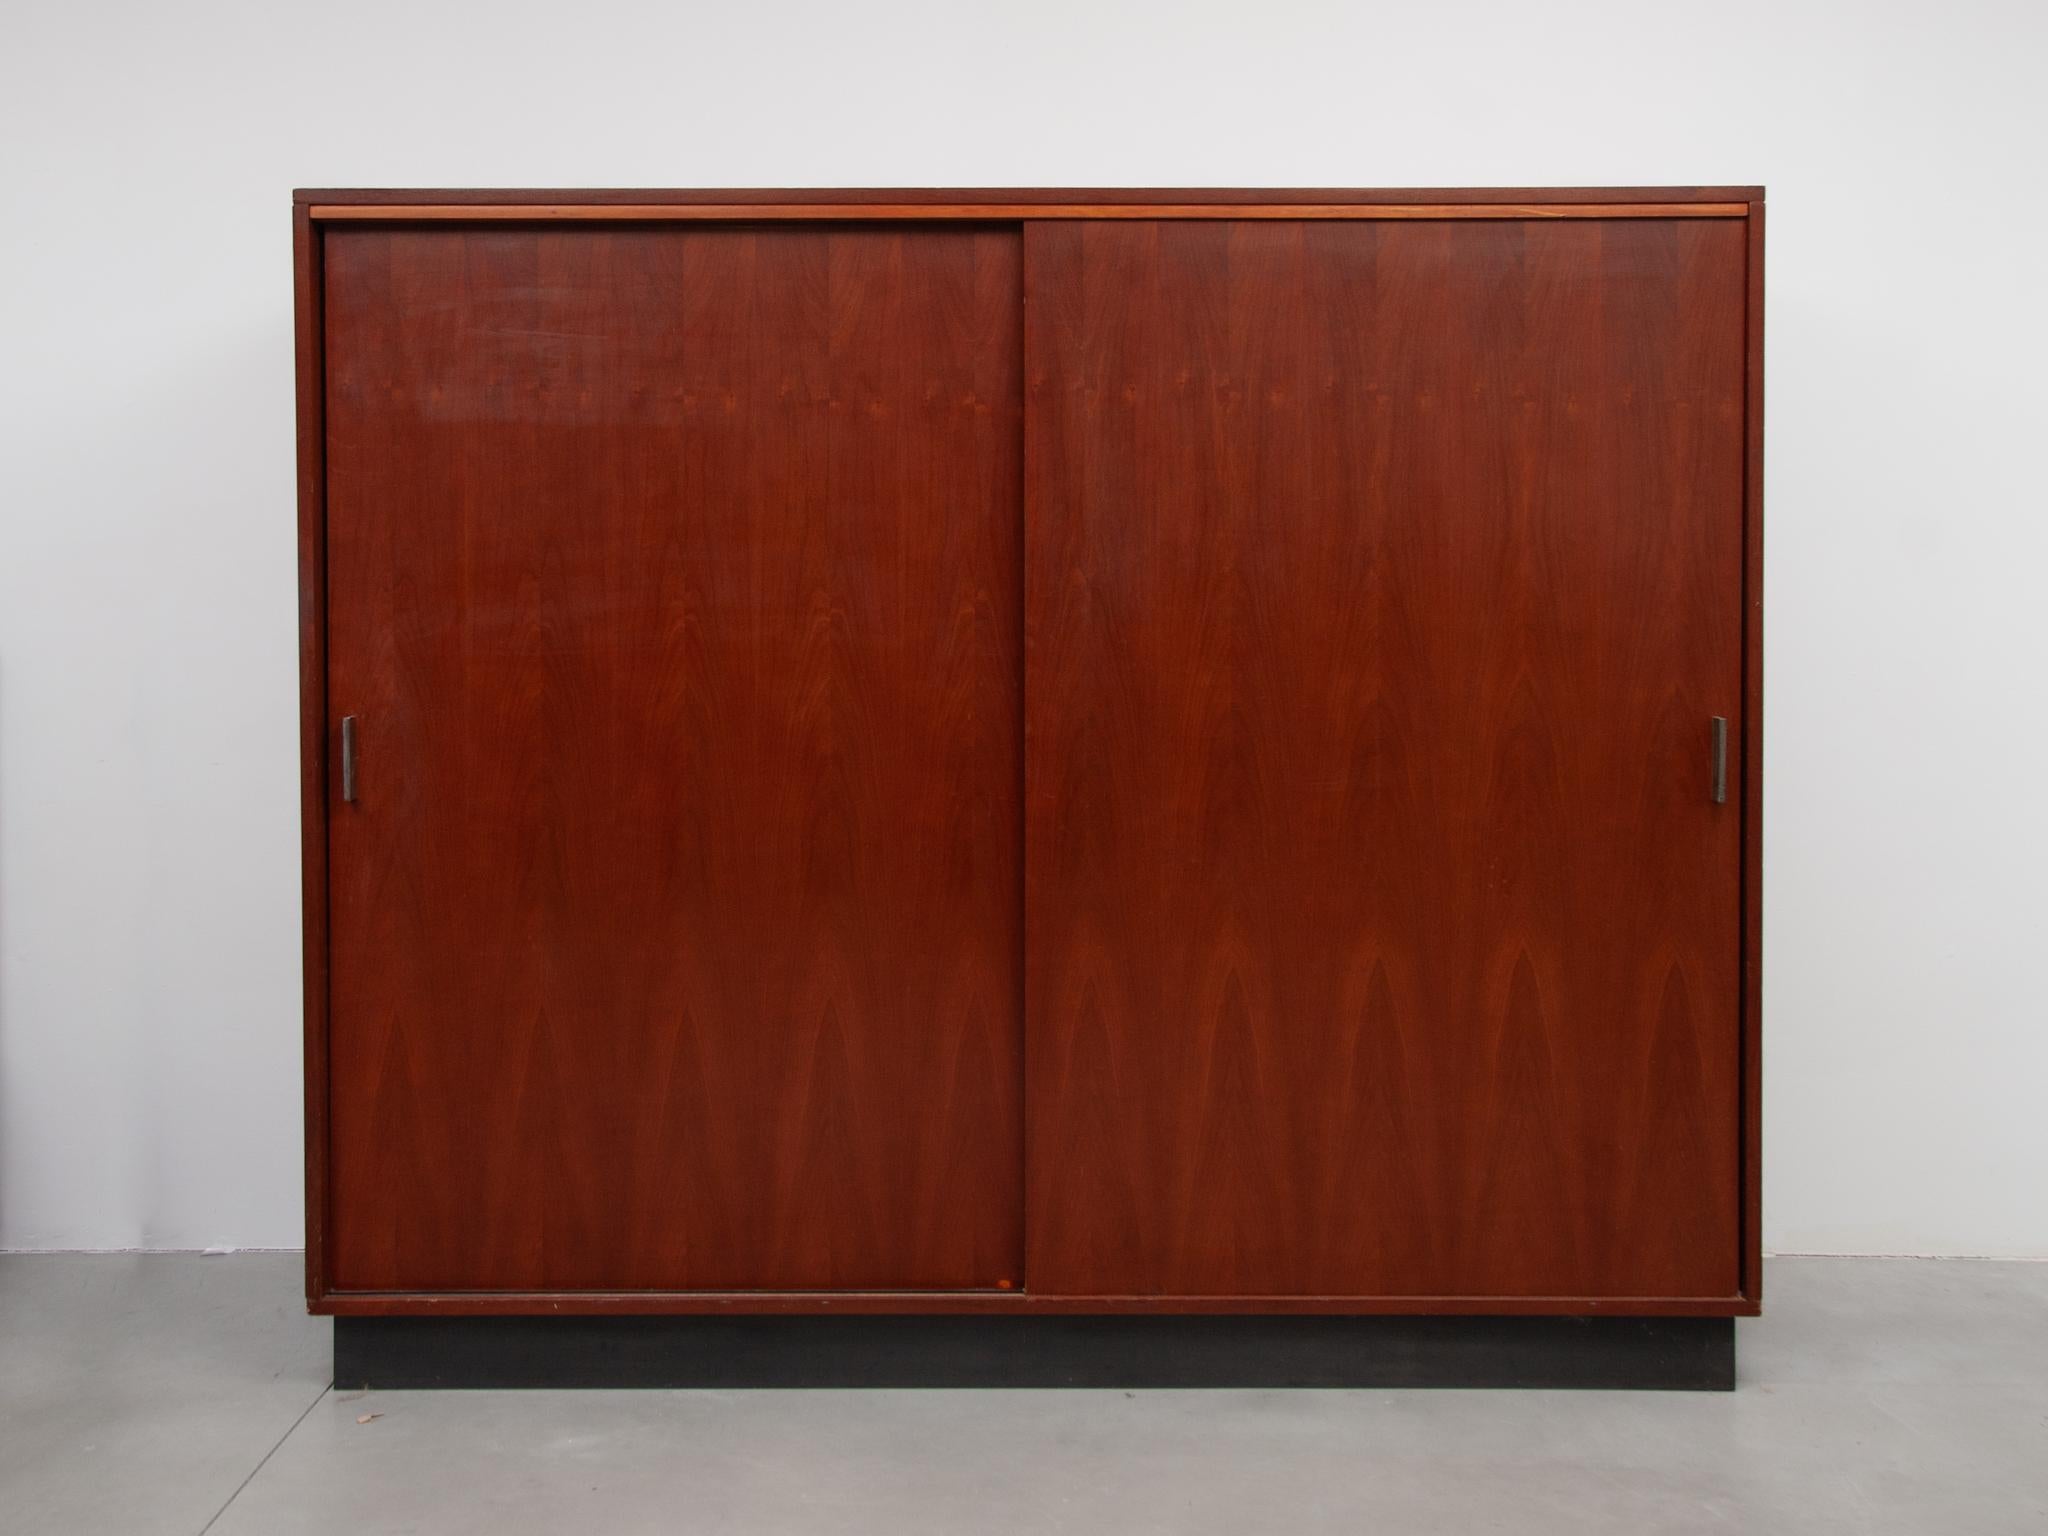 Beautiful wardrobe designed by Belgian designer Alfred Hendrickx for the company Belform. The doors of the cabinet are made of beautiful walnut veneer with chrome handles. The wardrobe consists of two sliding doors with plenty of storage space